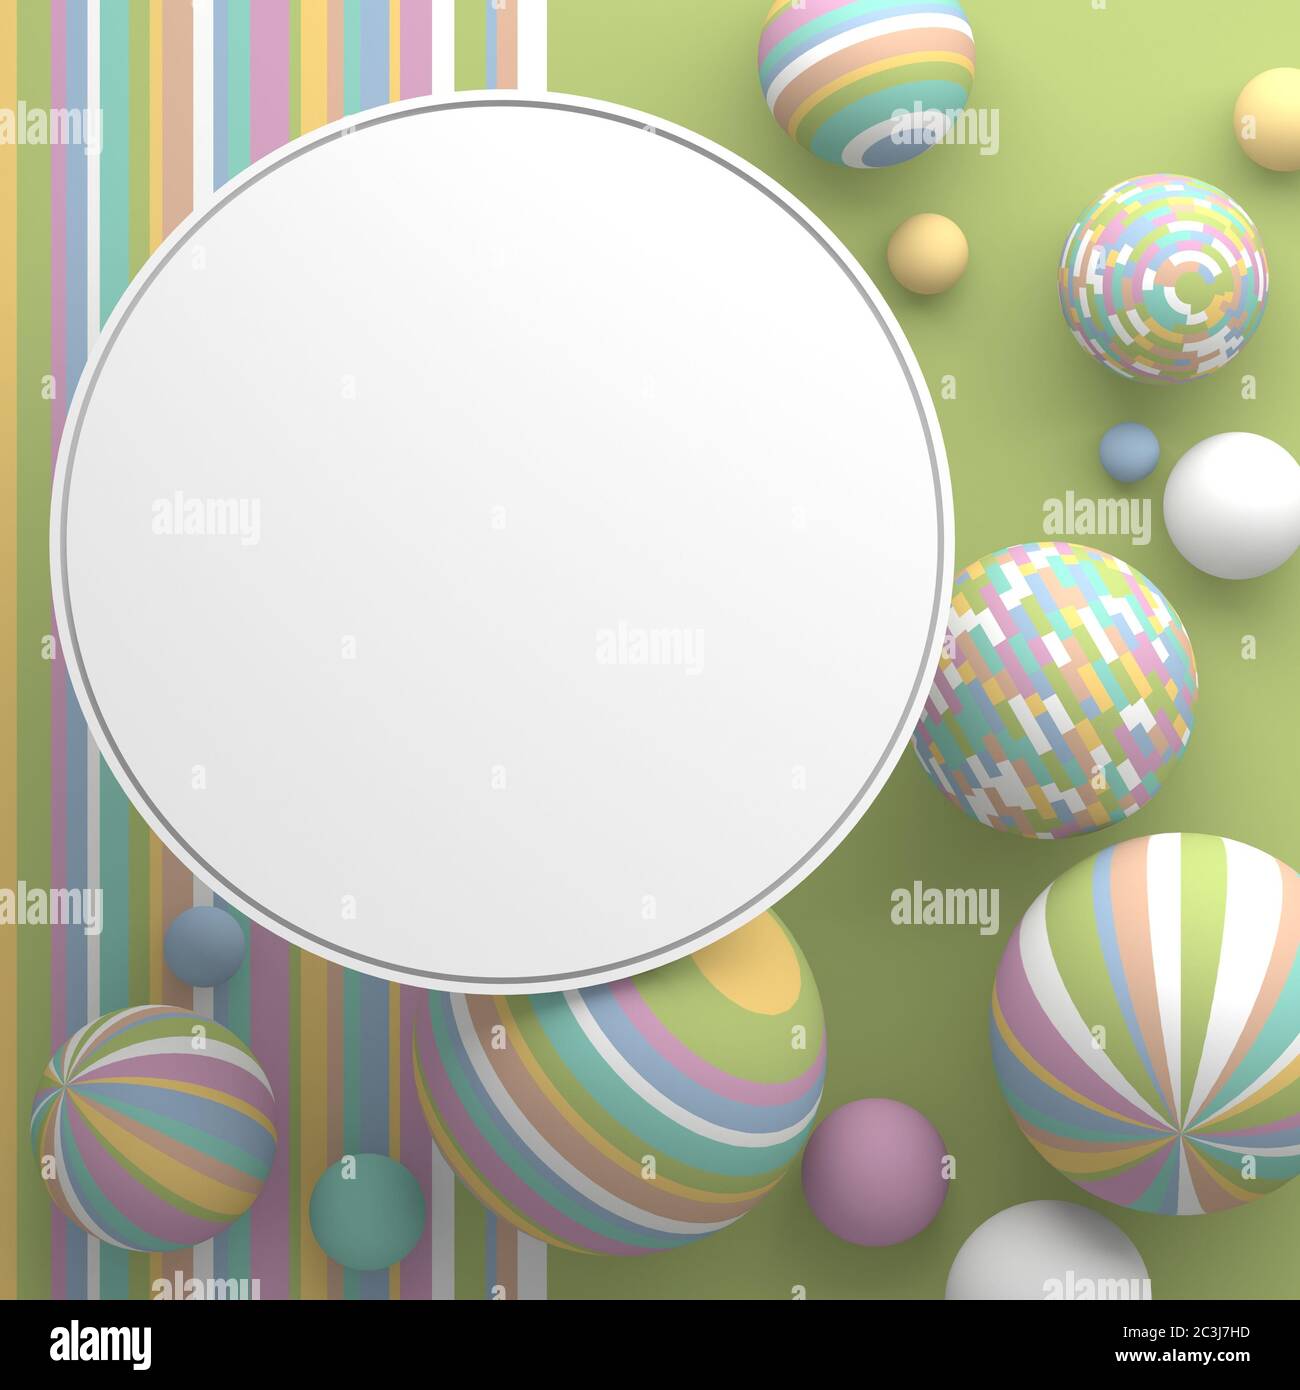 A round border frame with a copy space on white background. Abstract geometric composition in pastel colors from spheres of different sizes in colorfu Stock Photo